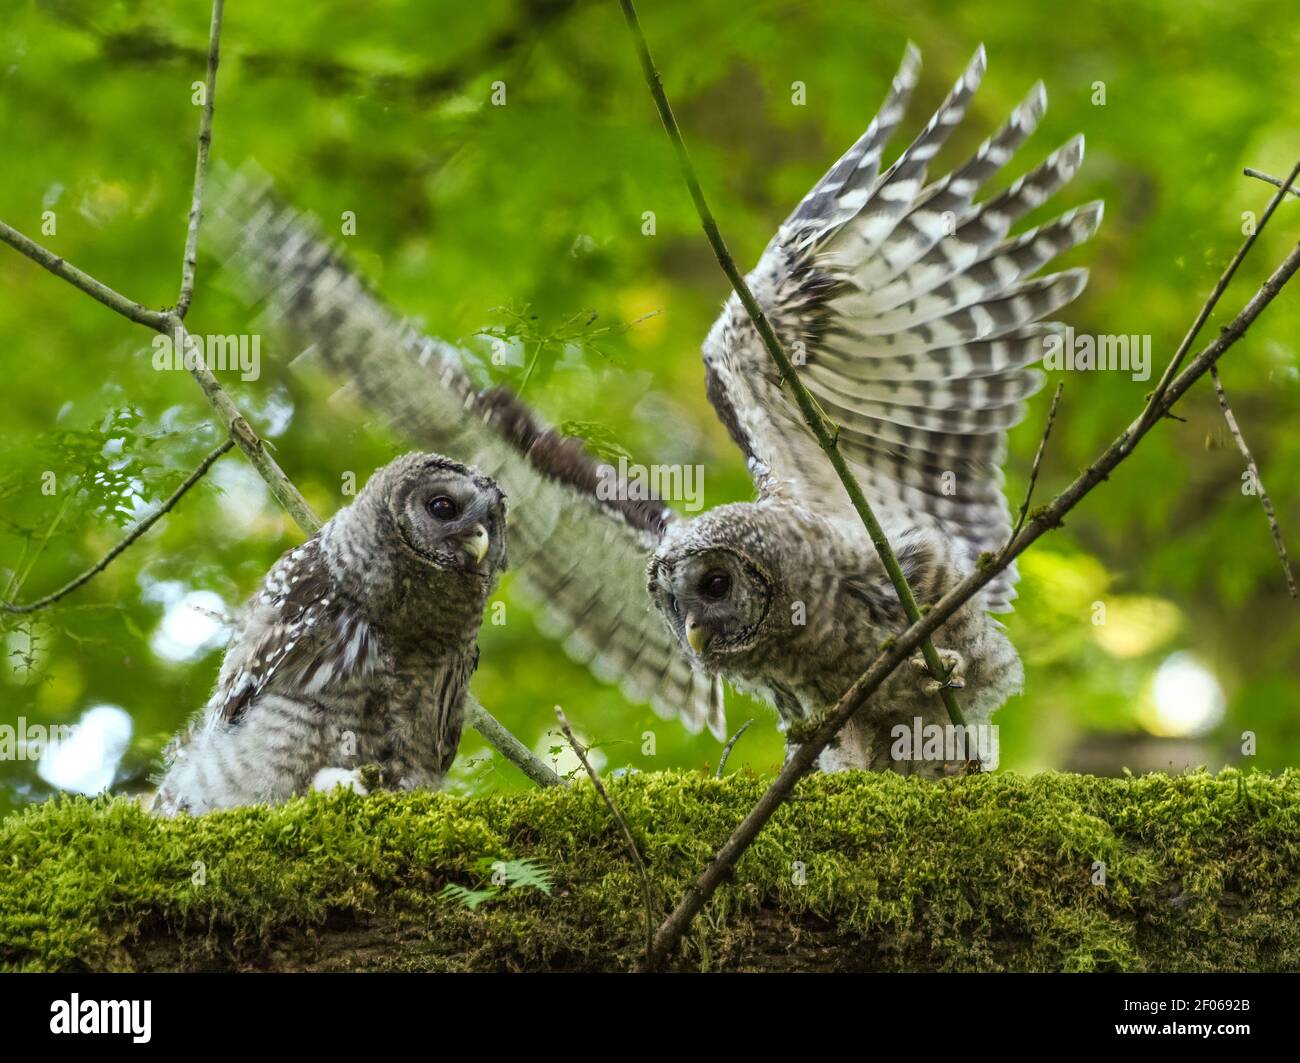 Two juvenile Barred Owls on a mossy limb in a Seattle park. Stock Photo